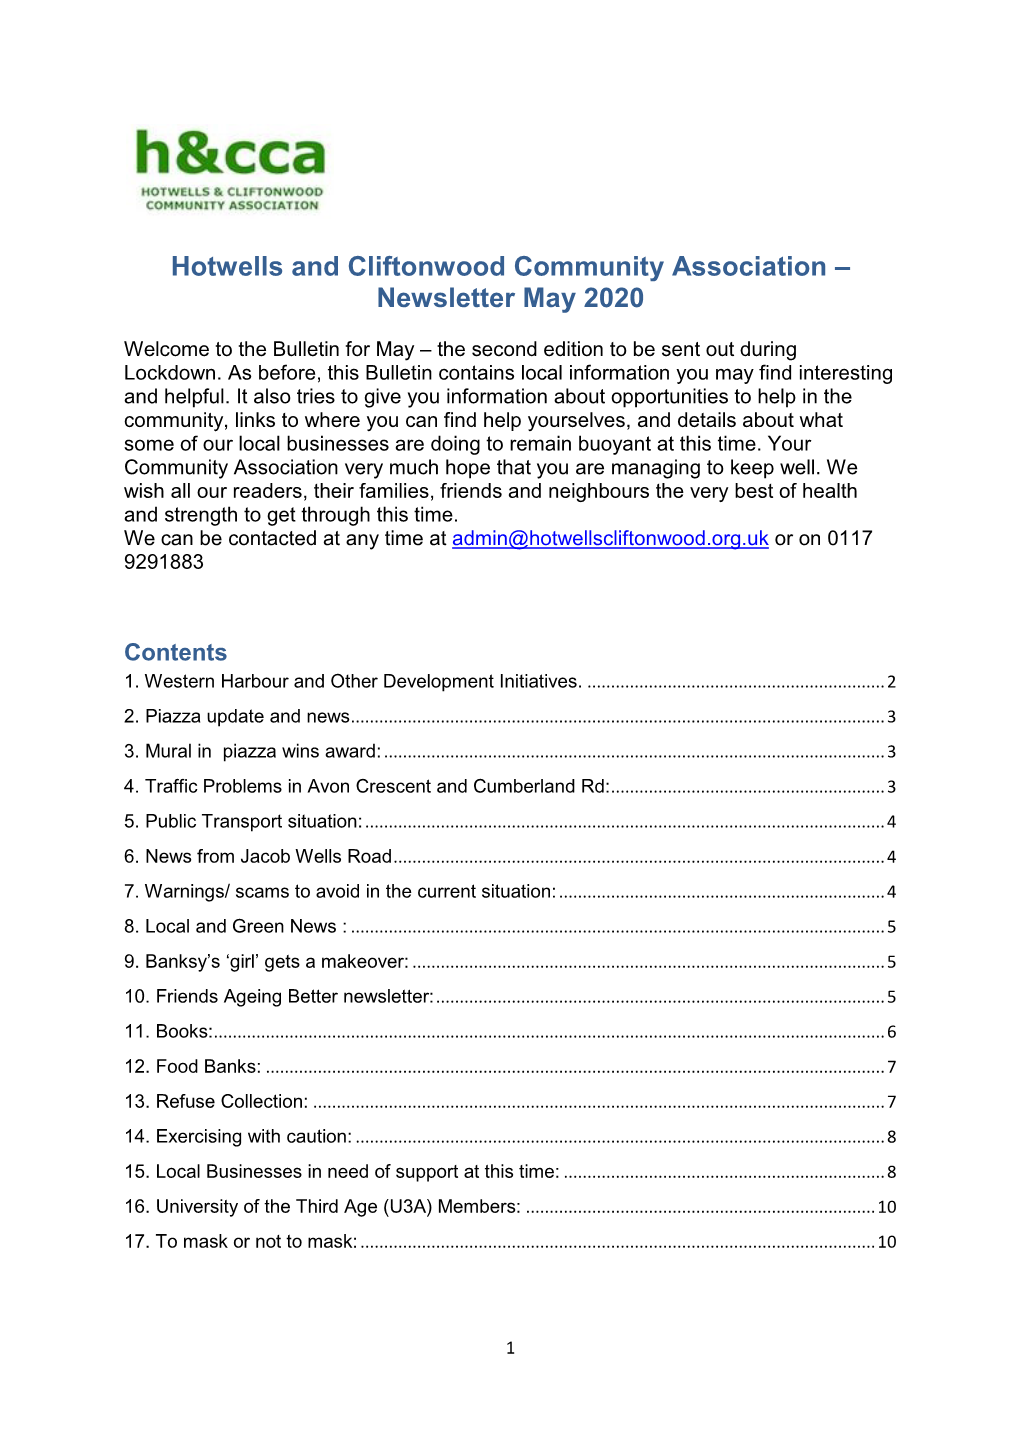 Hotwells and Cliftonwood Community Association – Newsletter May 2020